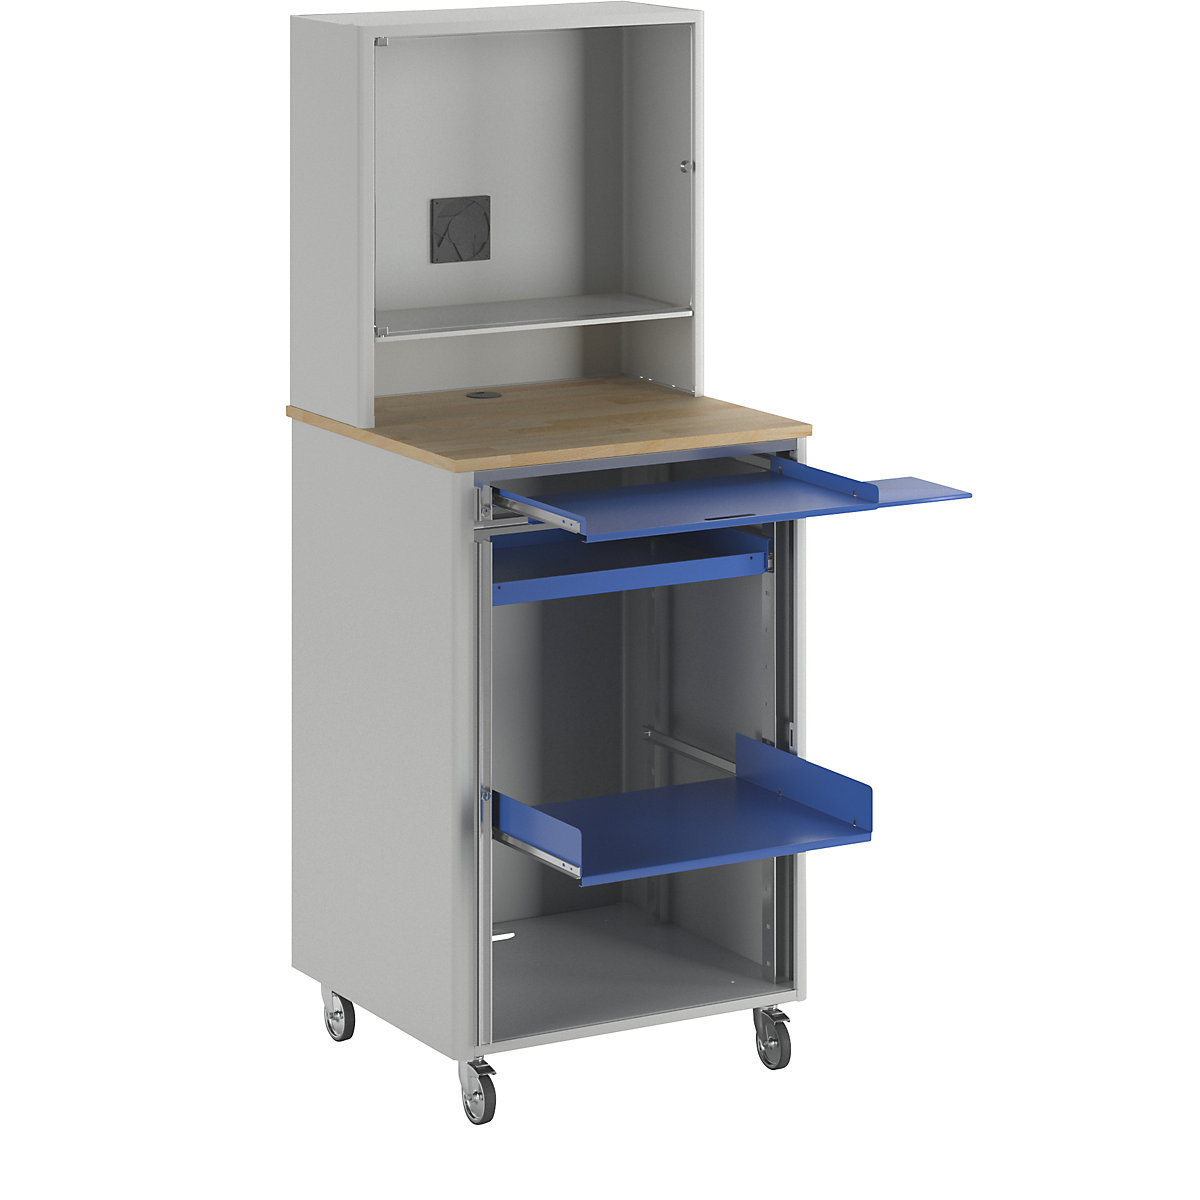 Computer workstation – RAU, HxWxD 1810 x 720 x 660 mm, with monitor housing, mobile, light grey / gentian blue-5